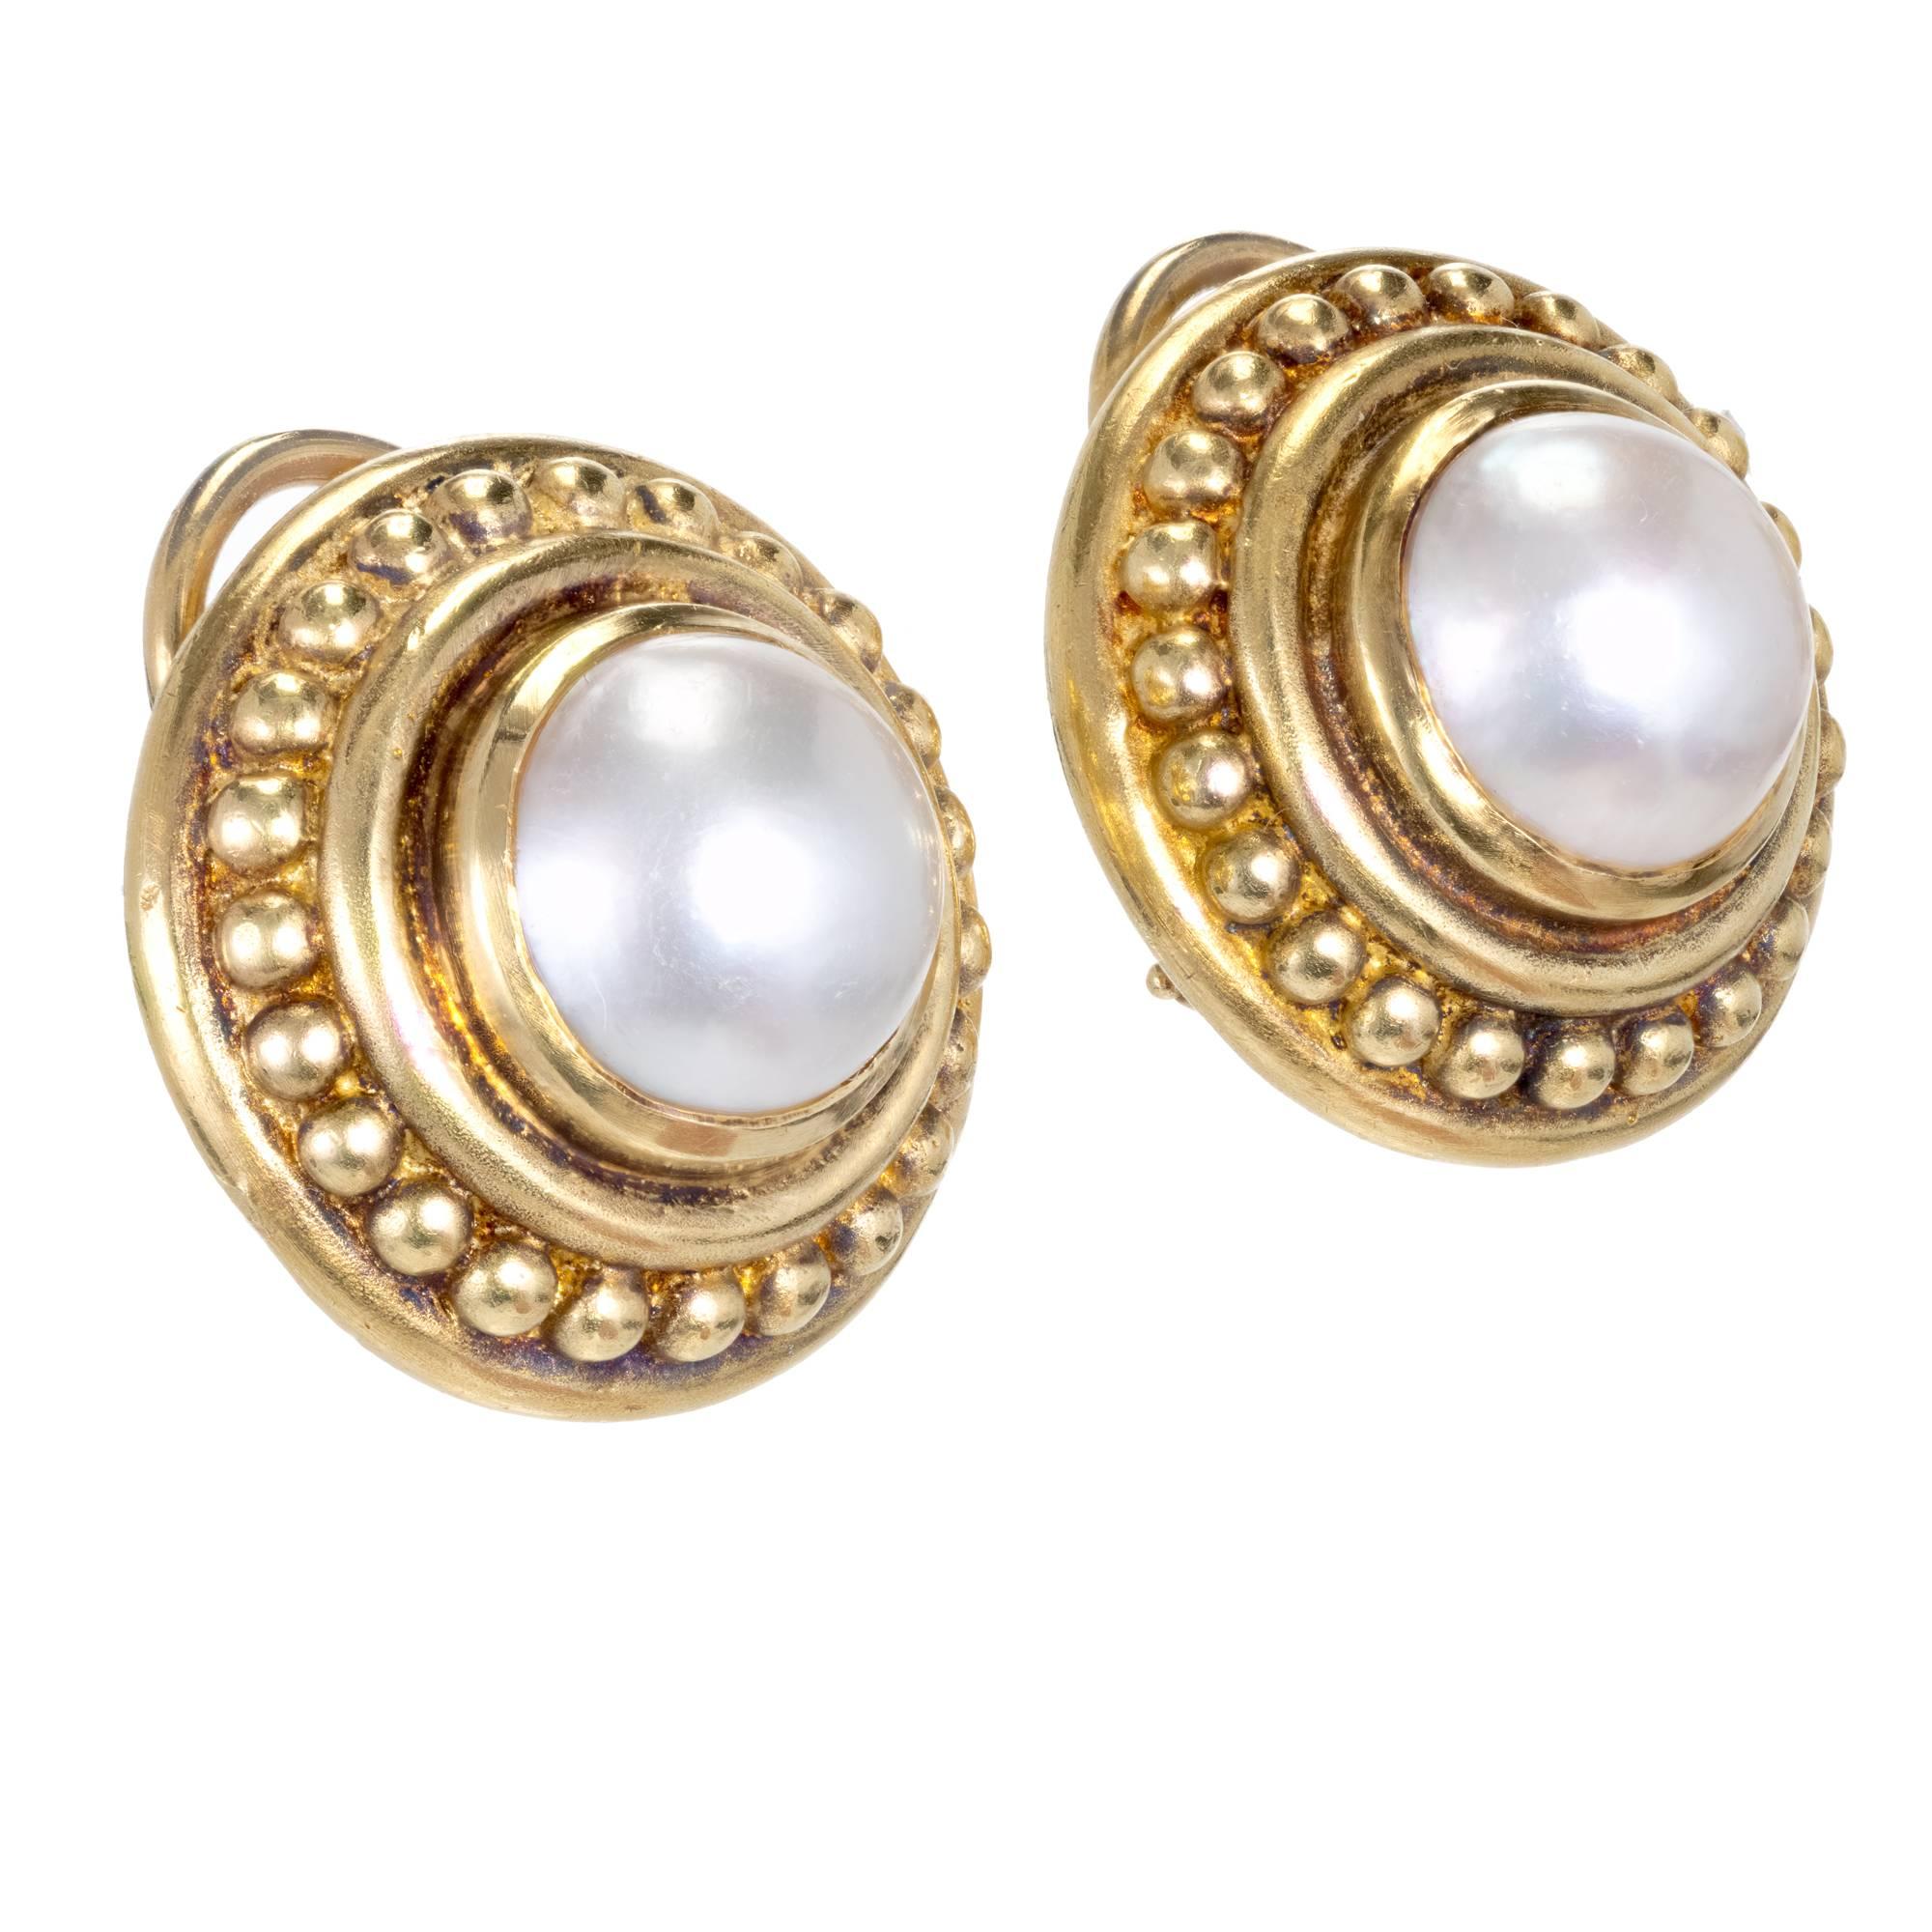 Judith Ripka 18k yellow gold clip post Mabe pearl earrings.

2 fine white Mabe pearls, 10mm, excellent lustre
18k yellow gold
19.28 grams
Tested and stamped: 18k
Hallmark: Judith Ripka
Diameter: 20mm or .8 inch
Depth: 10mm